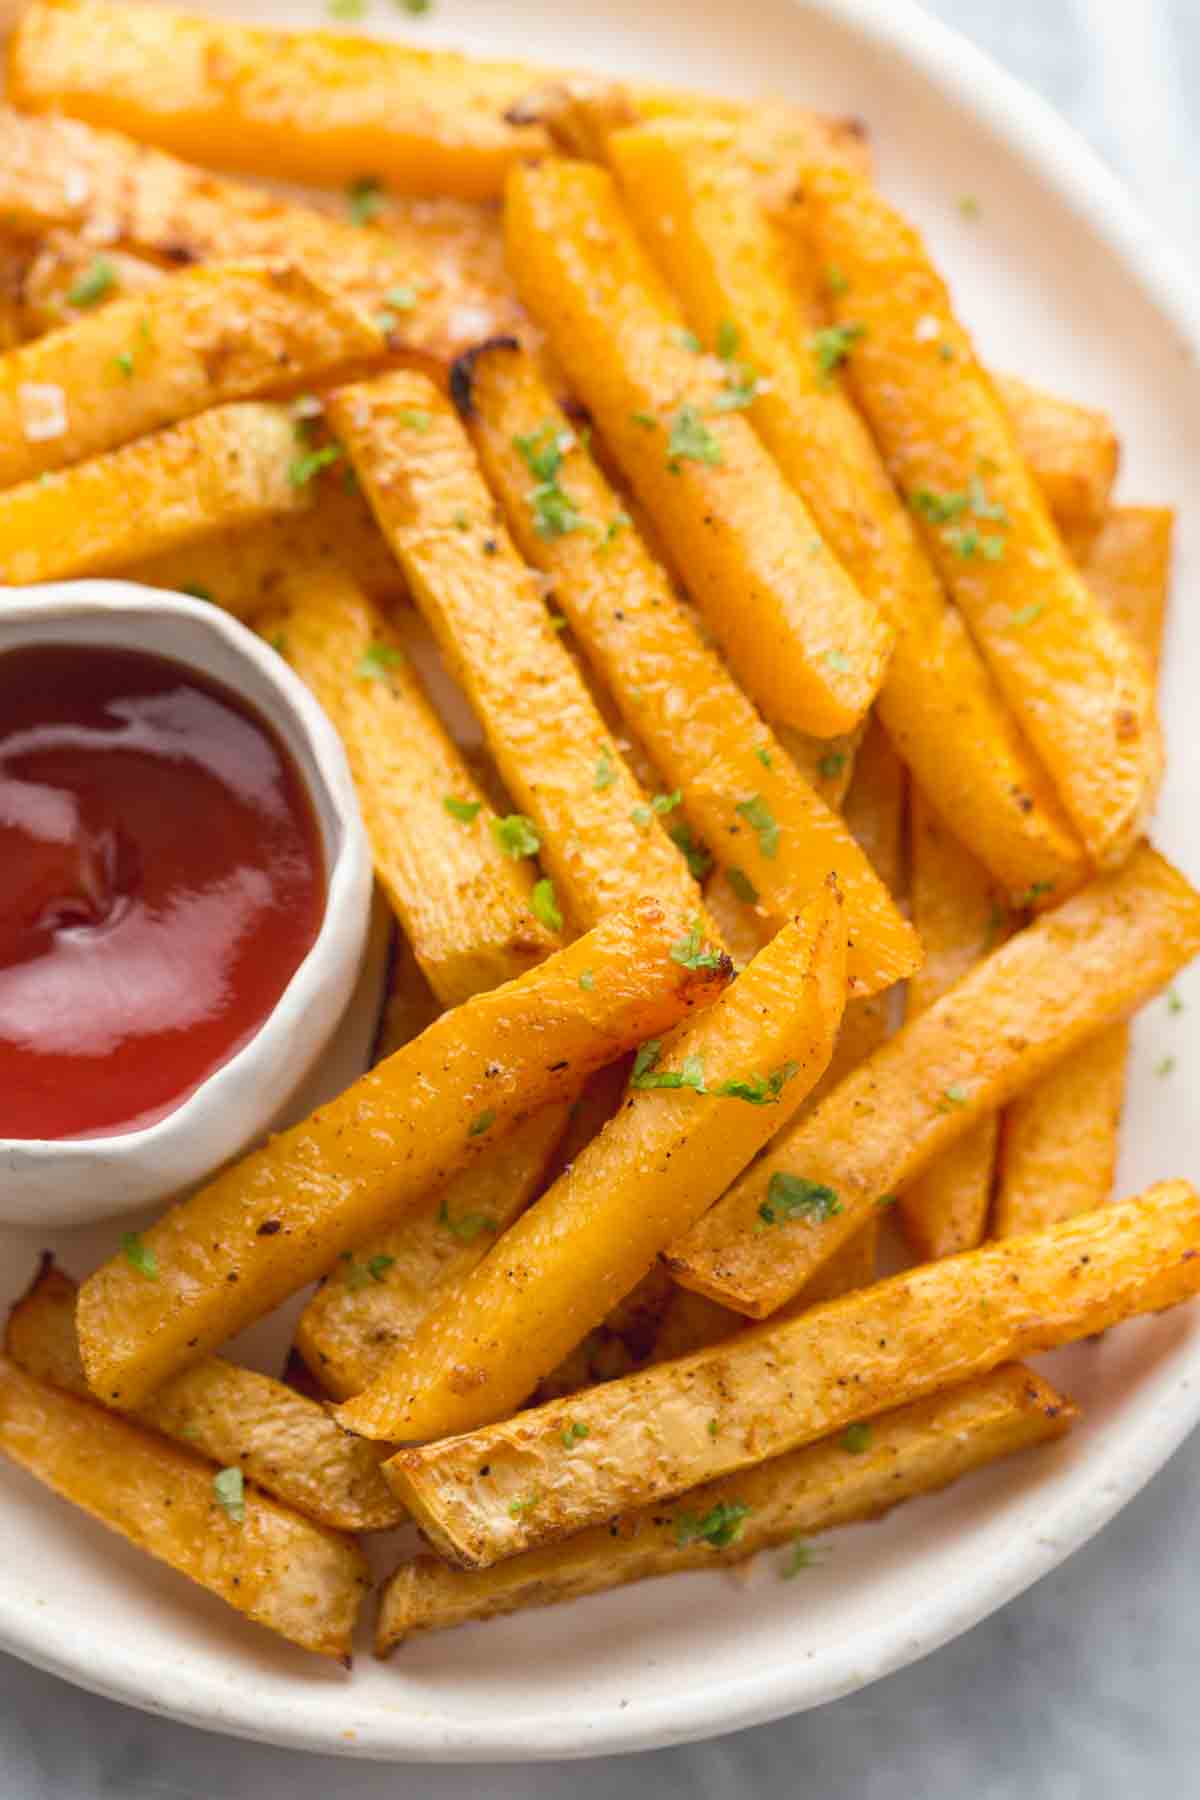 Golden rutabaga fries served on a white plate with ketchup